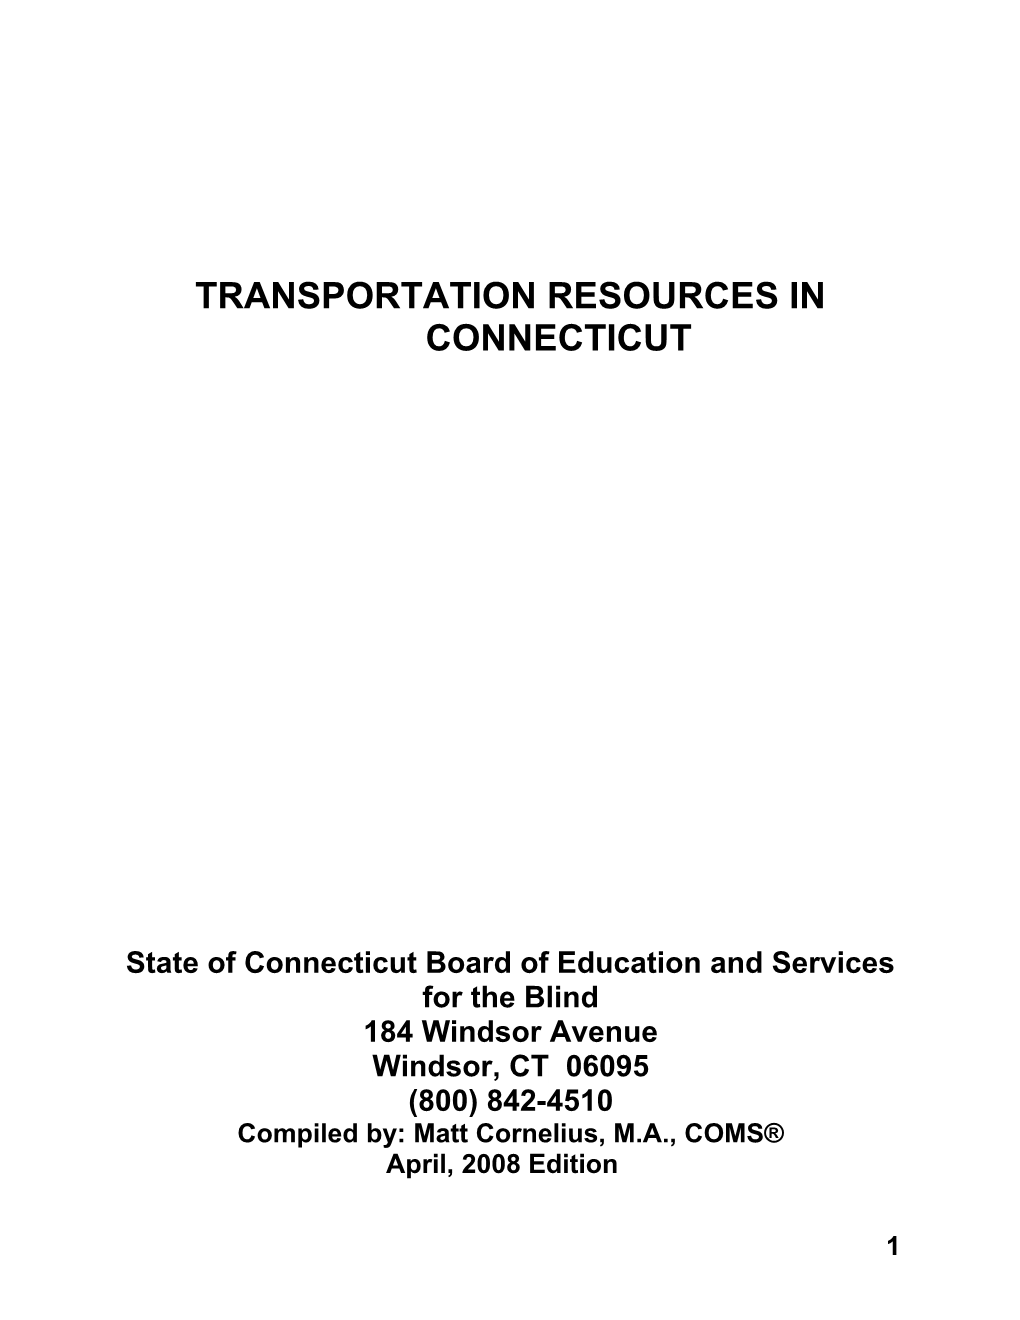 State of Connecticut Board of Education and Services for the Blind